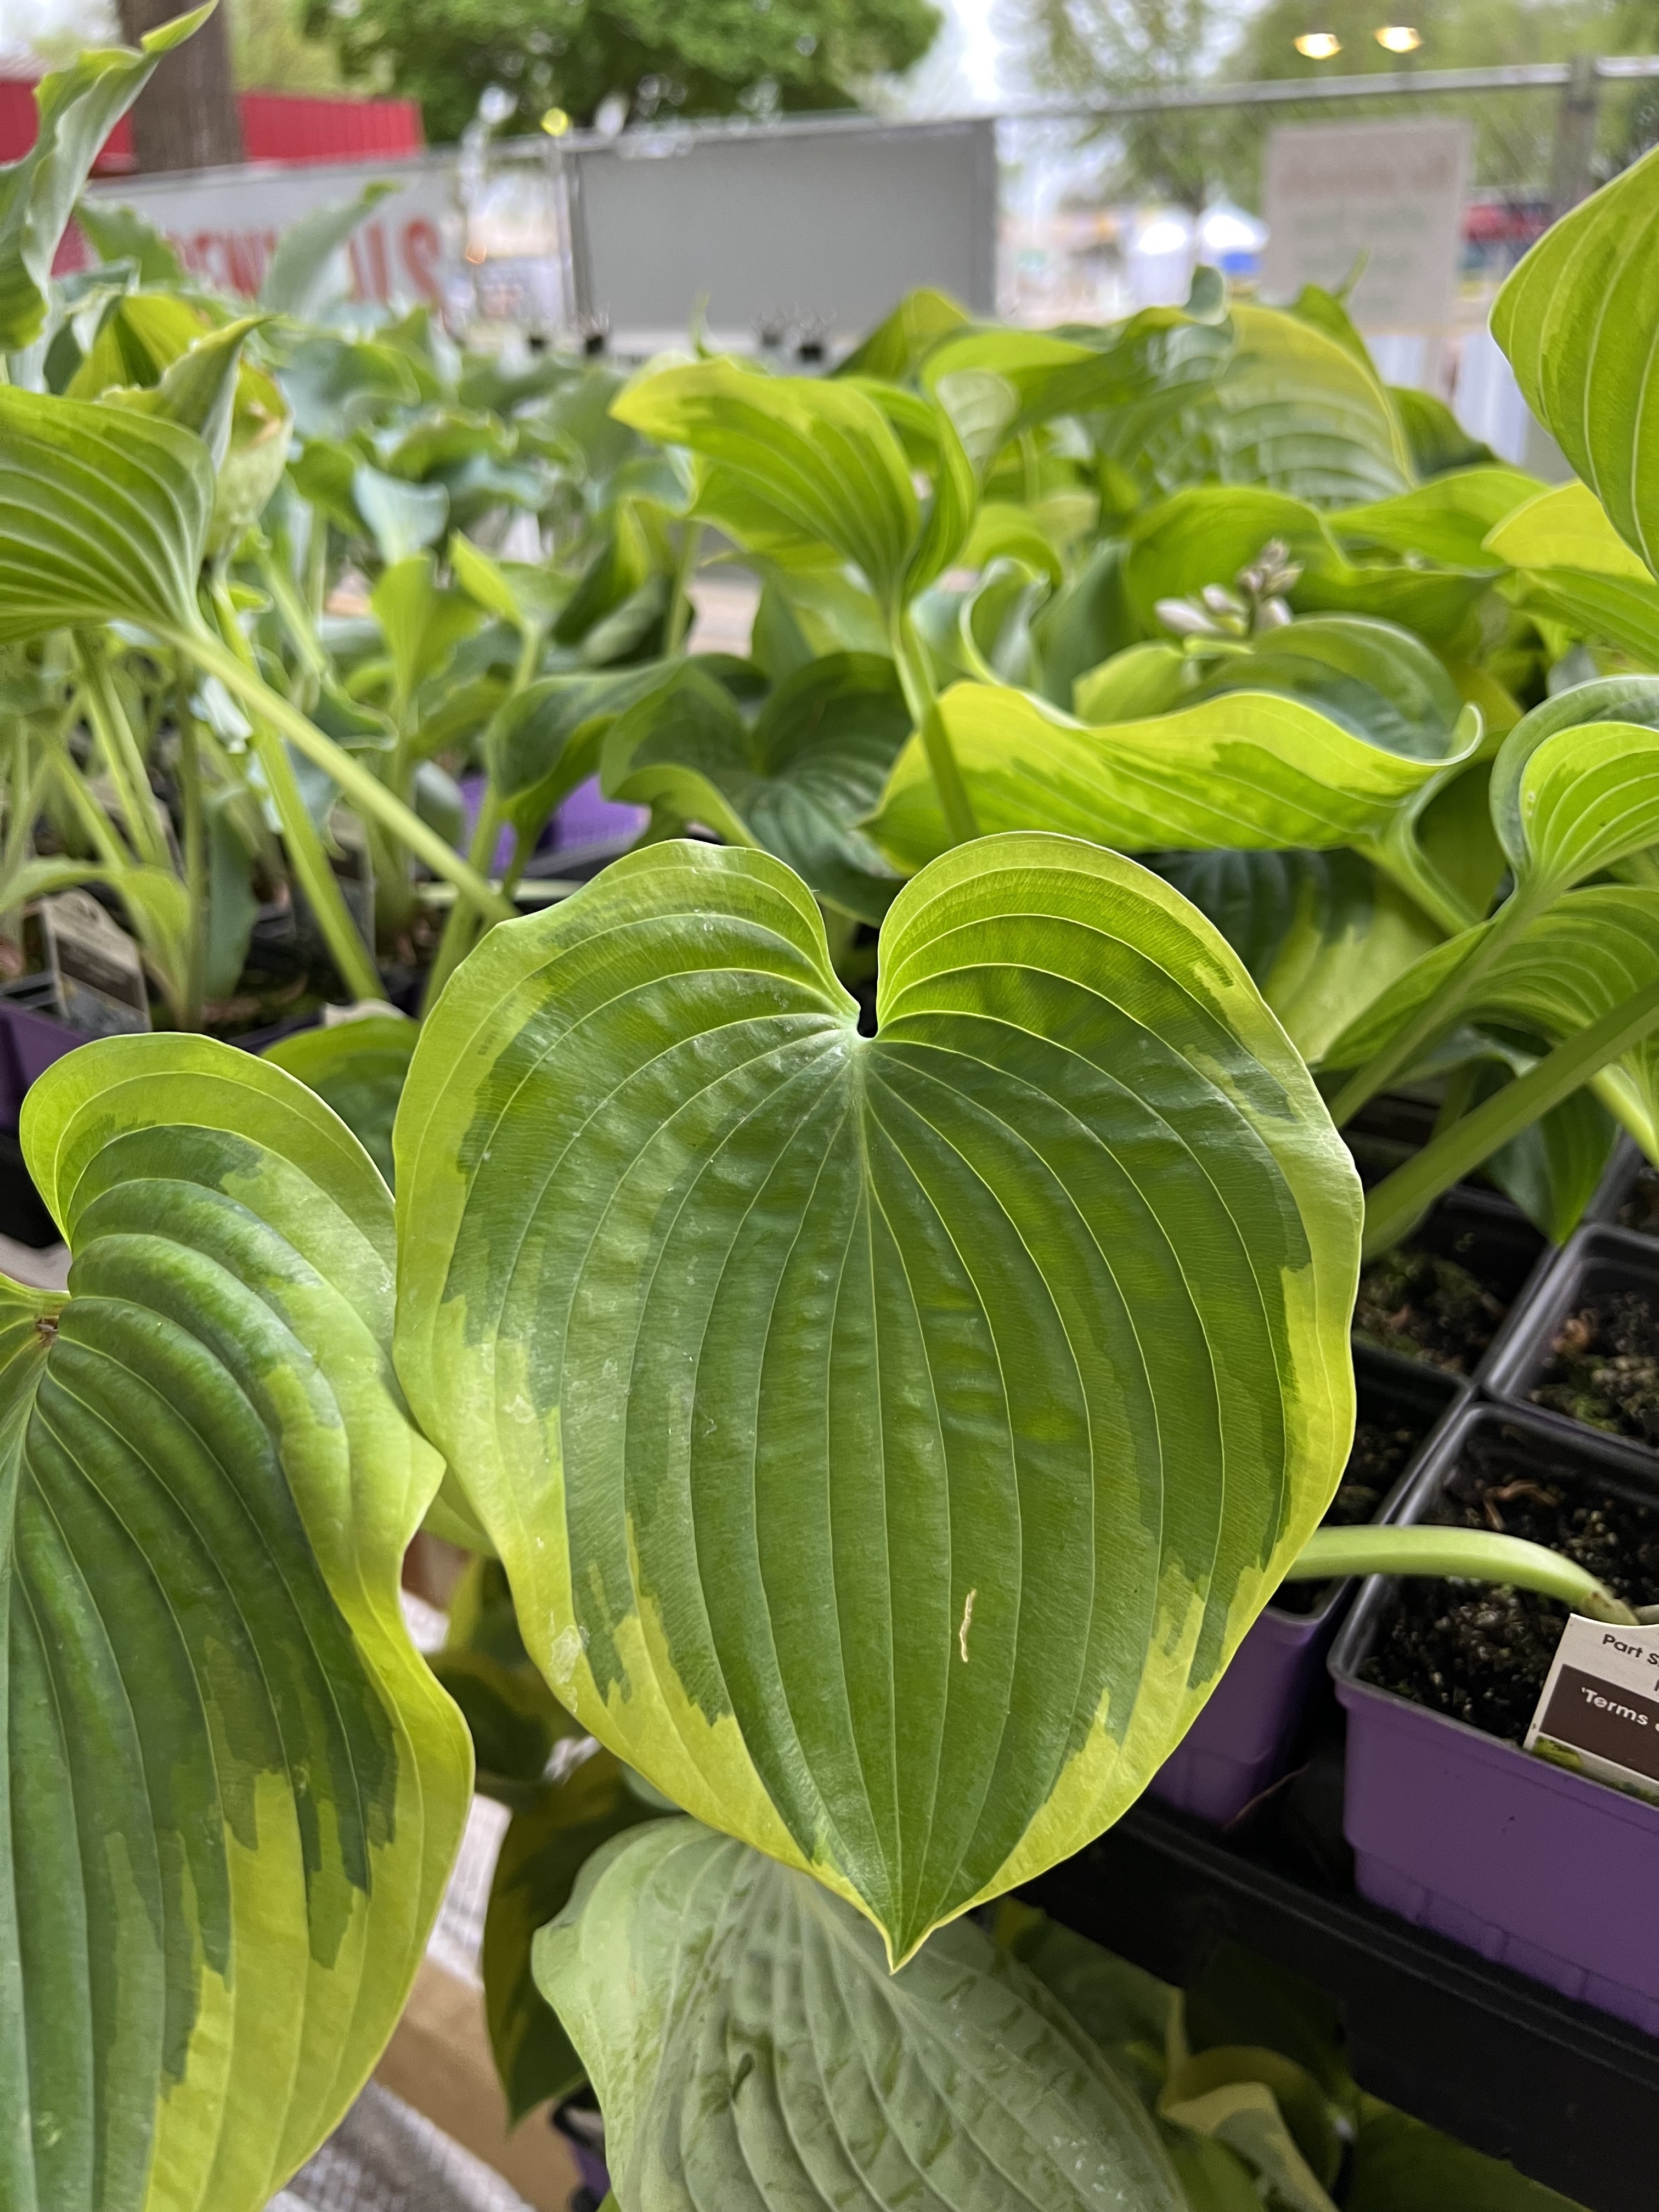 A selection of hostas remain after the first two days of the Sale.